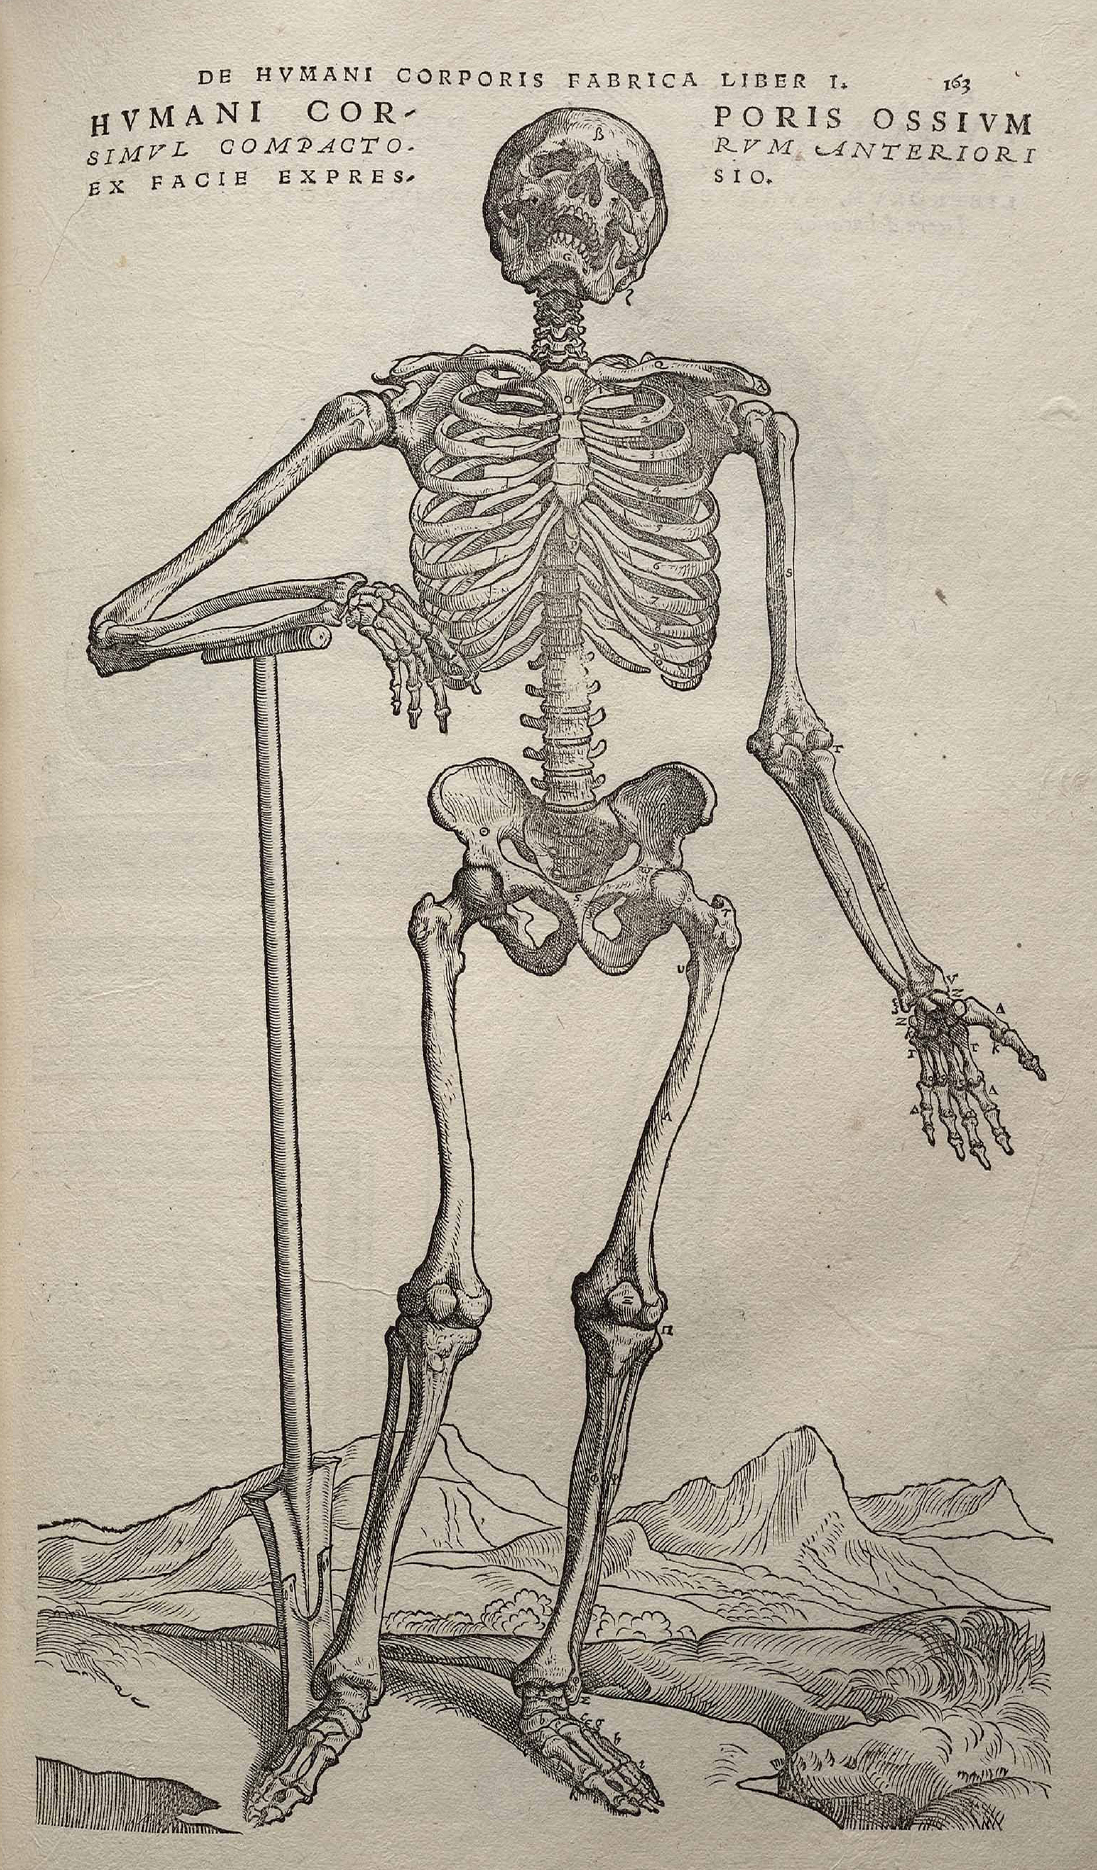 One of the most important scientific books of the Renaissance was On the Fabric of Human Anatomy. Published in 1543, it was a seven-volume work by the physician Andreas Visalius and illustrated by one of the students of the great Renaissance painter Titian. Although the primary purpose of On the Fabric of Human Anatomy was to provide an accurate picture of human bones, muscles, and organs, it is filled with anatomical drawings set in odd places. This skeleton appears to be going on a hike in the Alps. (Image via Wikipedia) 